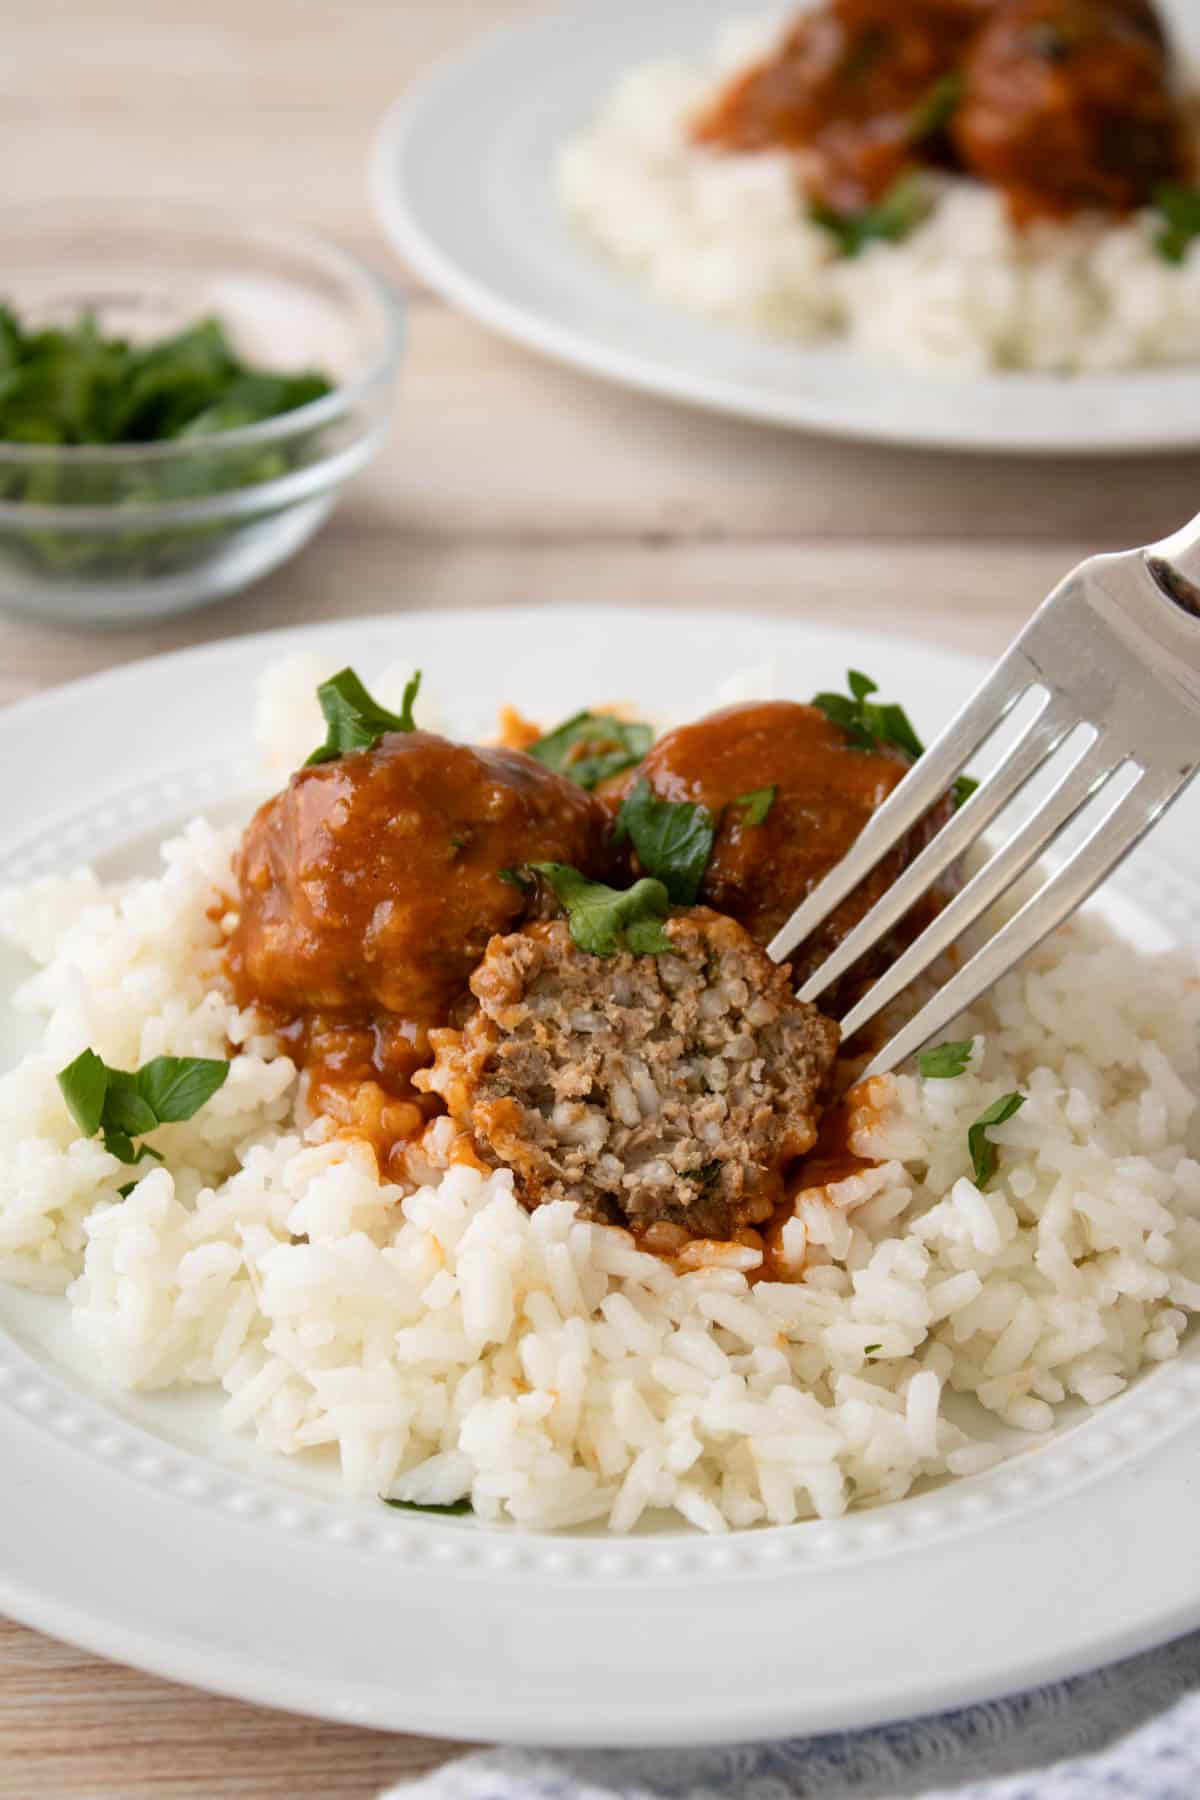 Porcupine meatballs on a plate of rice with a bite taken out of one of them.